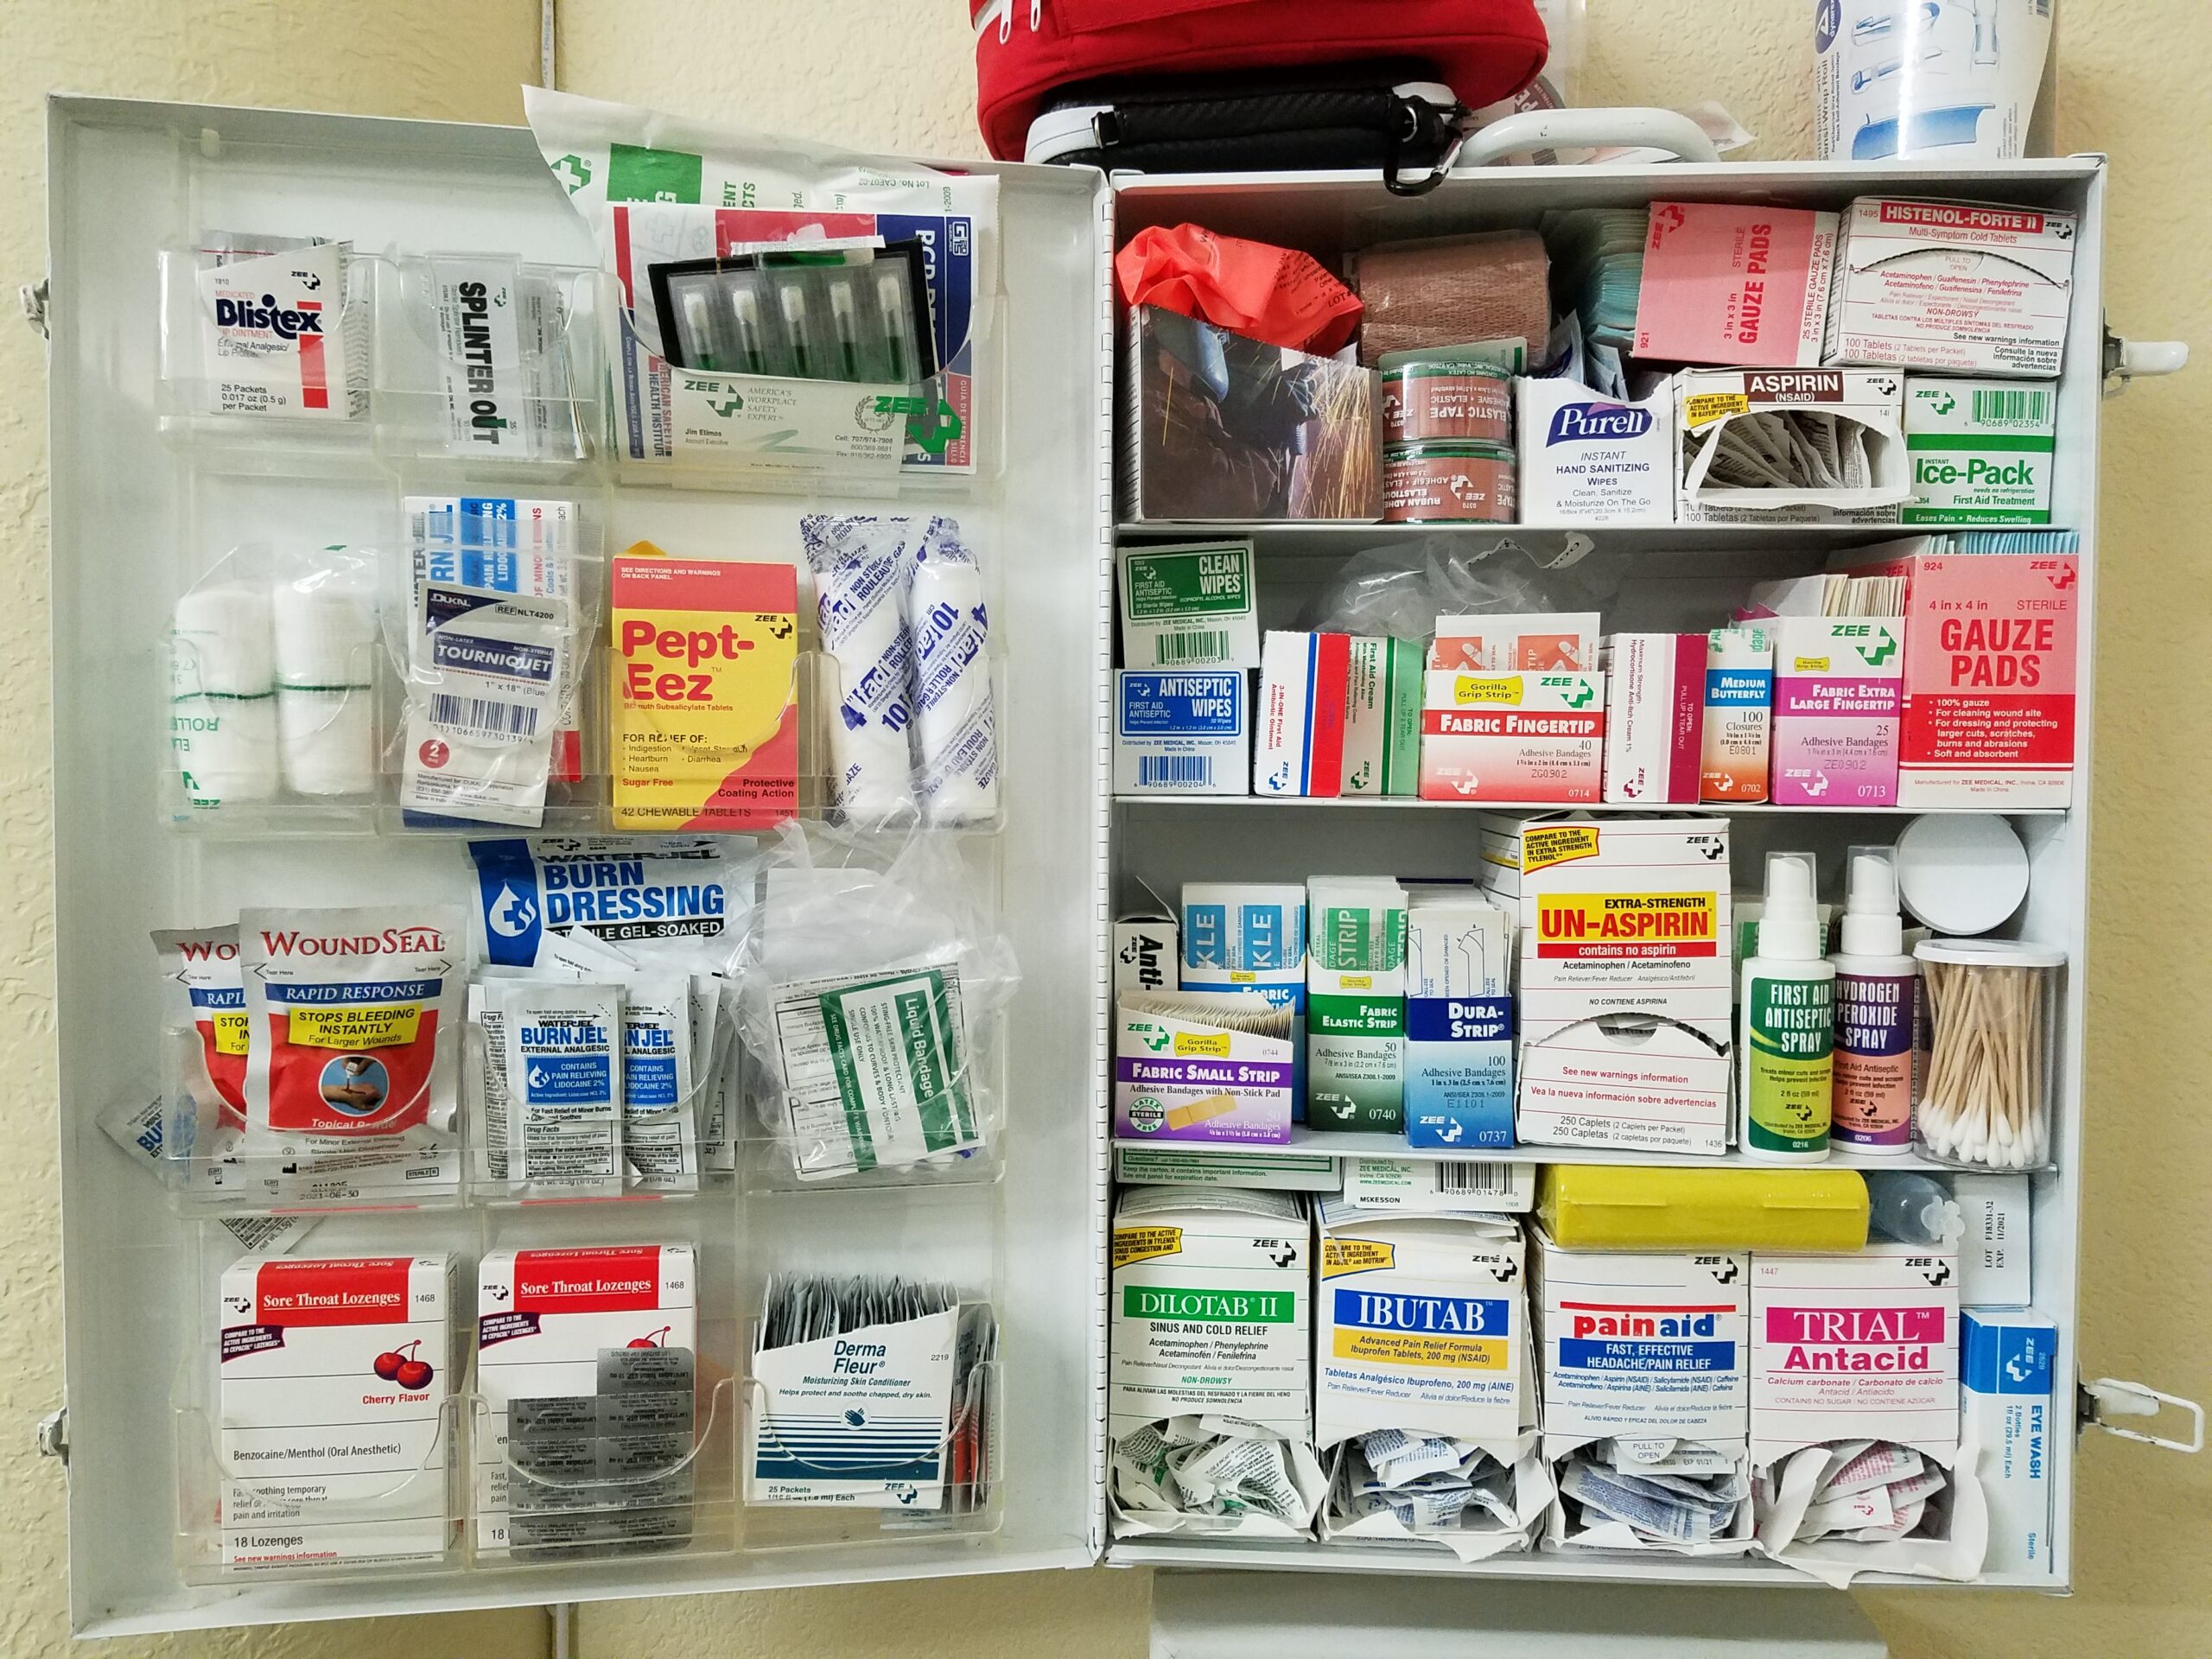 First Aid Kit filled with supplies, mounted to the wall